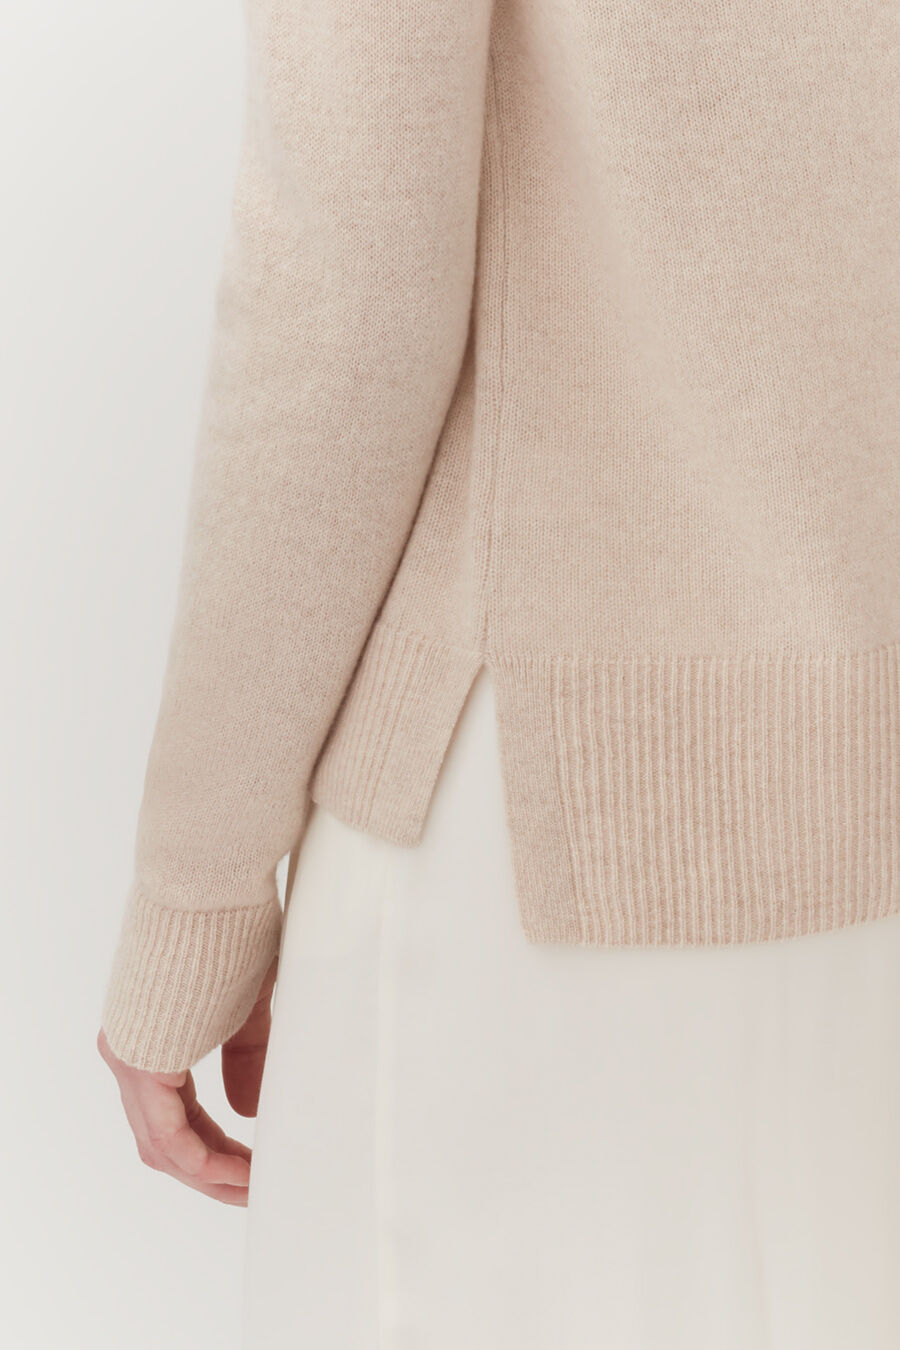 Close-up of a person wearing a sweater and skirt.